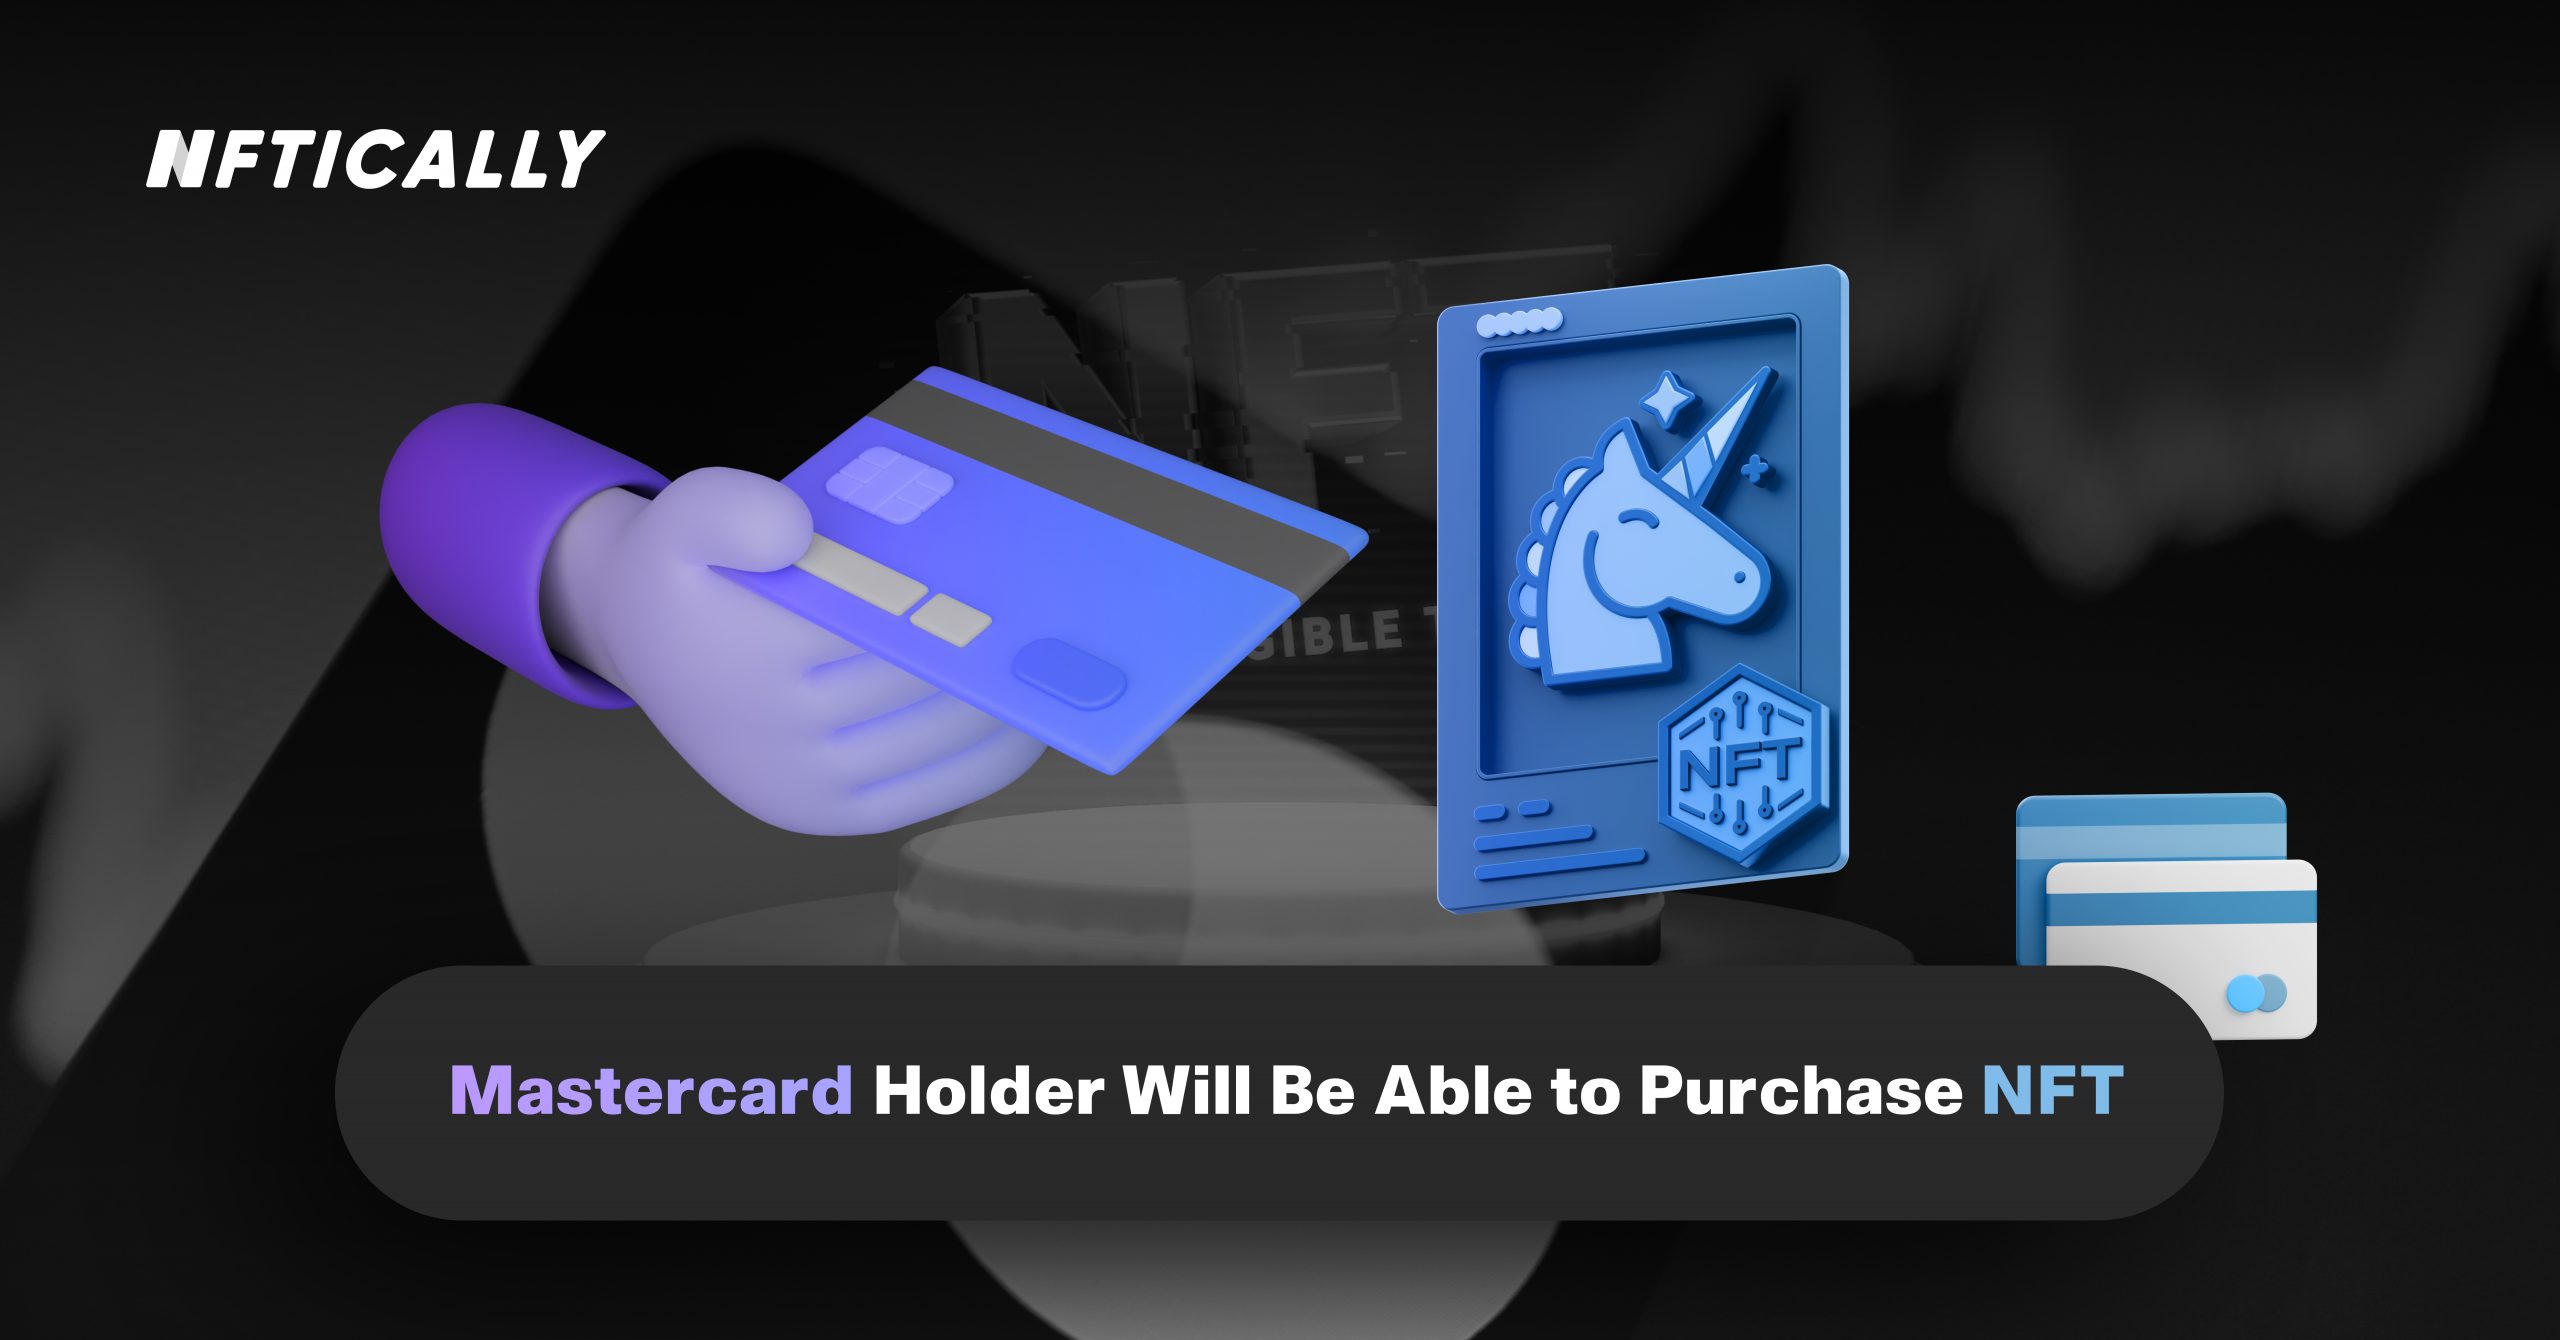 Mastercard Holder Will Be Able to Purchase NFT